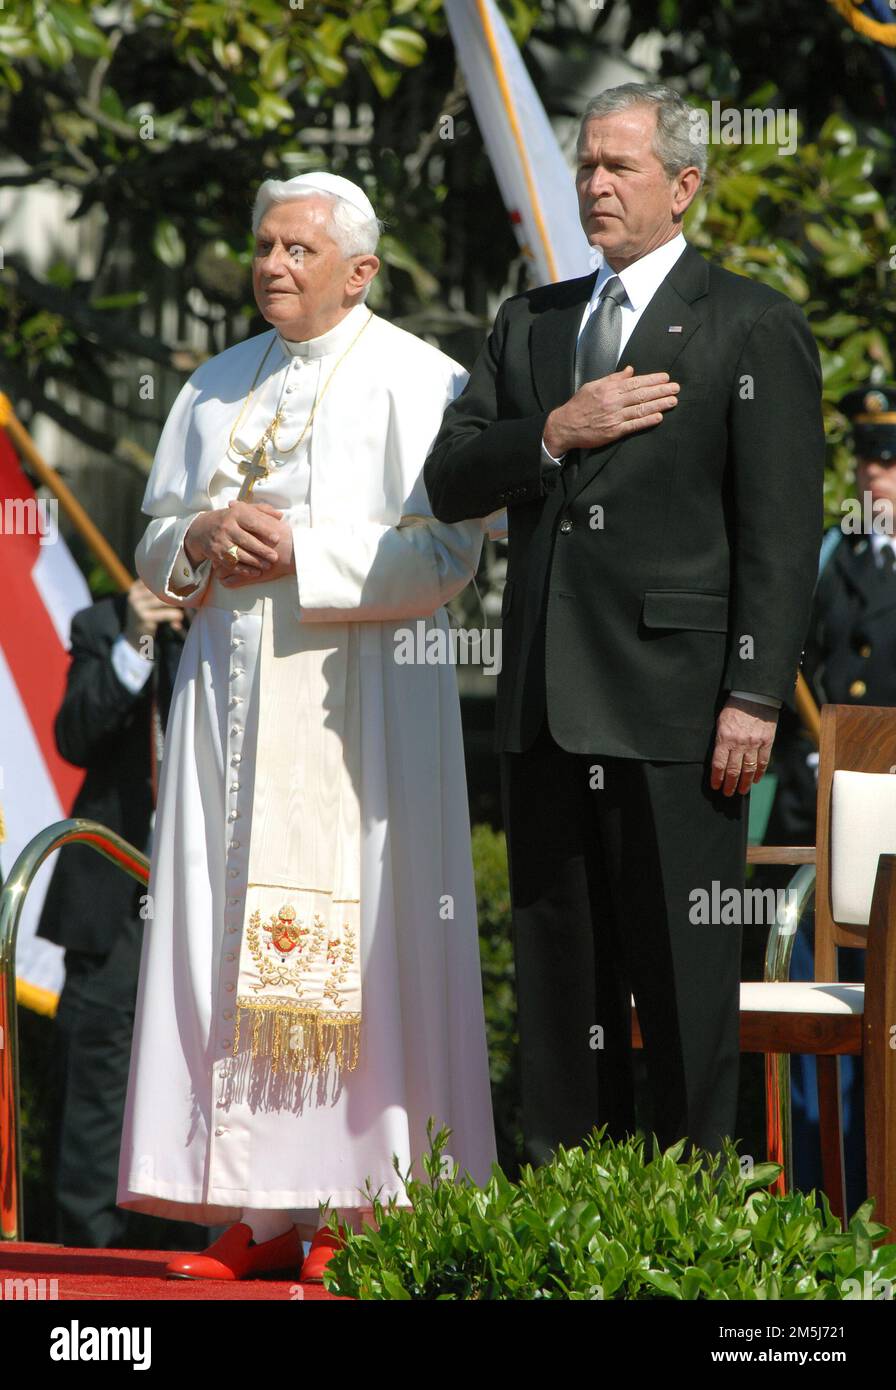 Pope Benedict XVI, left, and United States President George W. Bush, right, stand at attention as the National Anthem is played as the Pontiff arrives at the White House in Washington, D.C. on Wednesday, April 16, 2008.  .Credit: Ron Sachs / CNP.(RESTRICTION: NO New York or New Jersey Newspapers or newspapers within a 75 mile radius of New York City) / MediaPunch Stock Photo